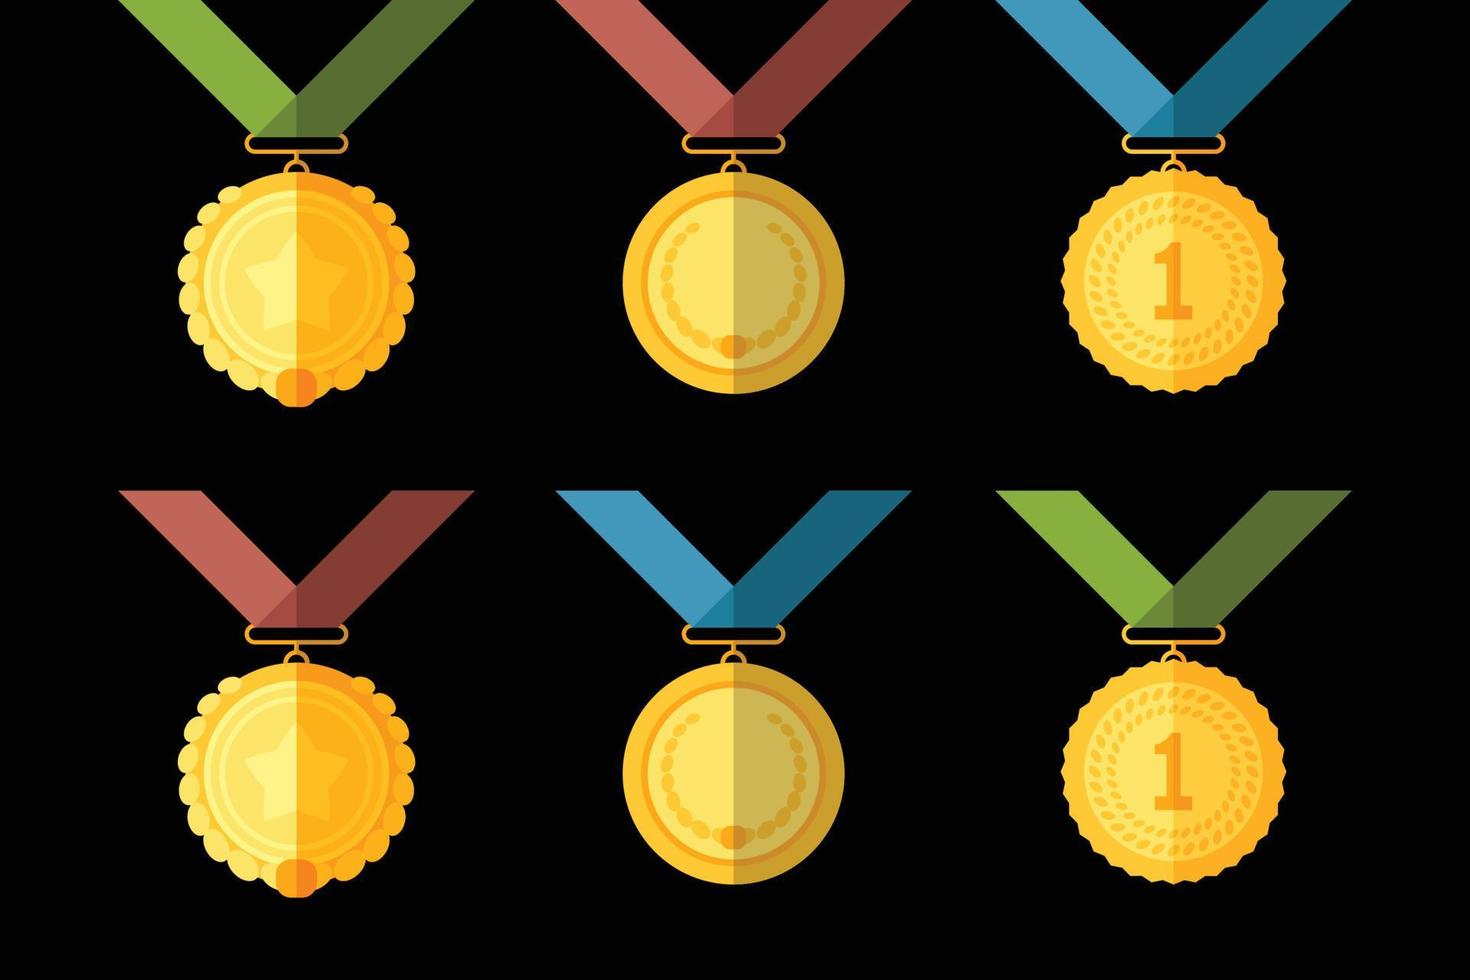 Simple illustration of golden award medal with ribbons for winners flat style vector